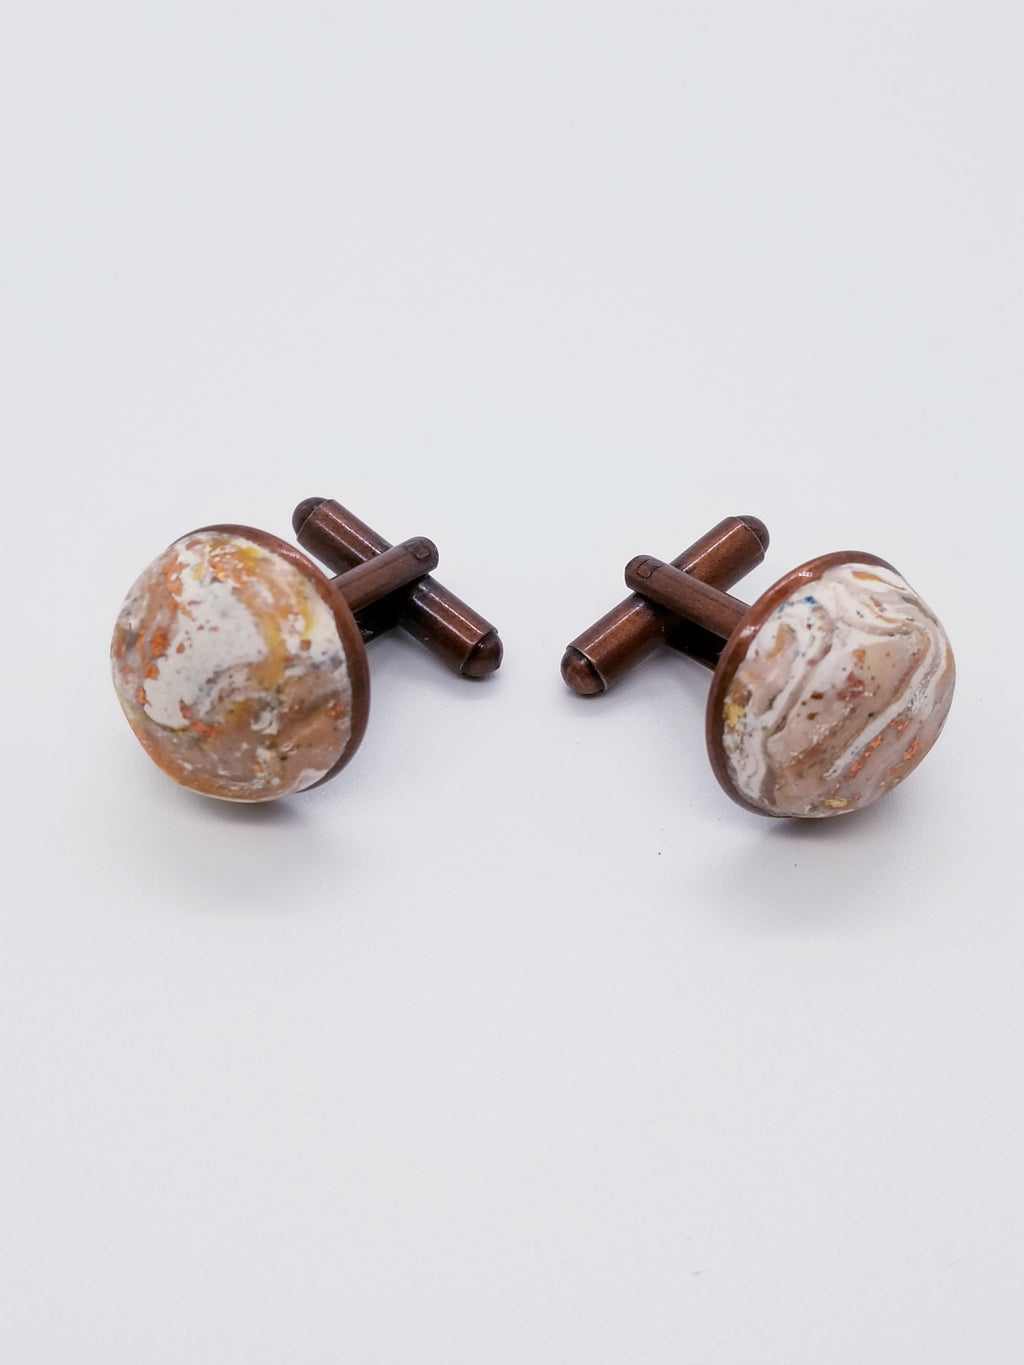 Length: 1 inches | Weight: 0.3 ounces  Designed just for you! The copper brushed cufflinks cuff button gold tan swirl polymer clay Cabochon design. Metal is high polish finish and plating, stylish simple design, comfortable to wear, and  fits well. 